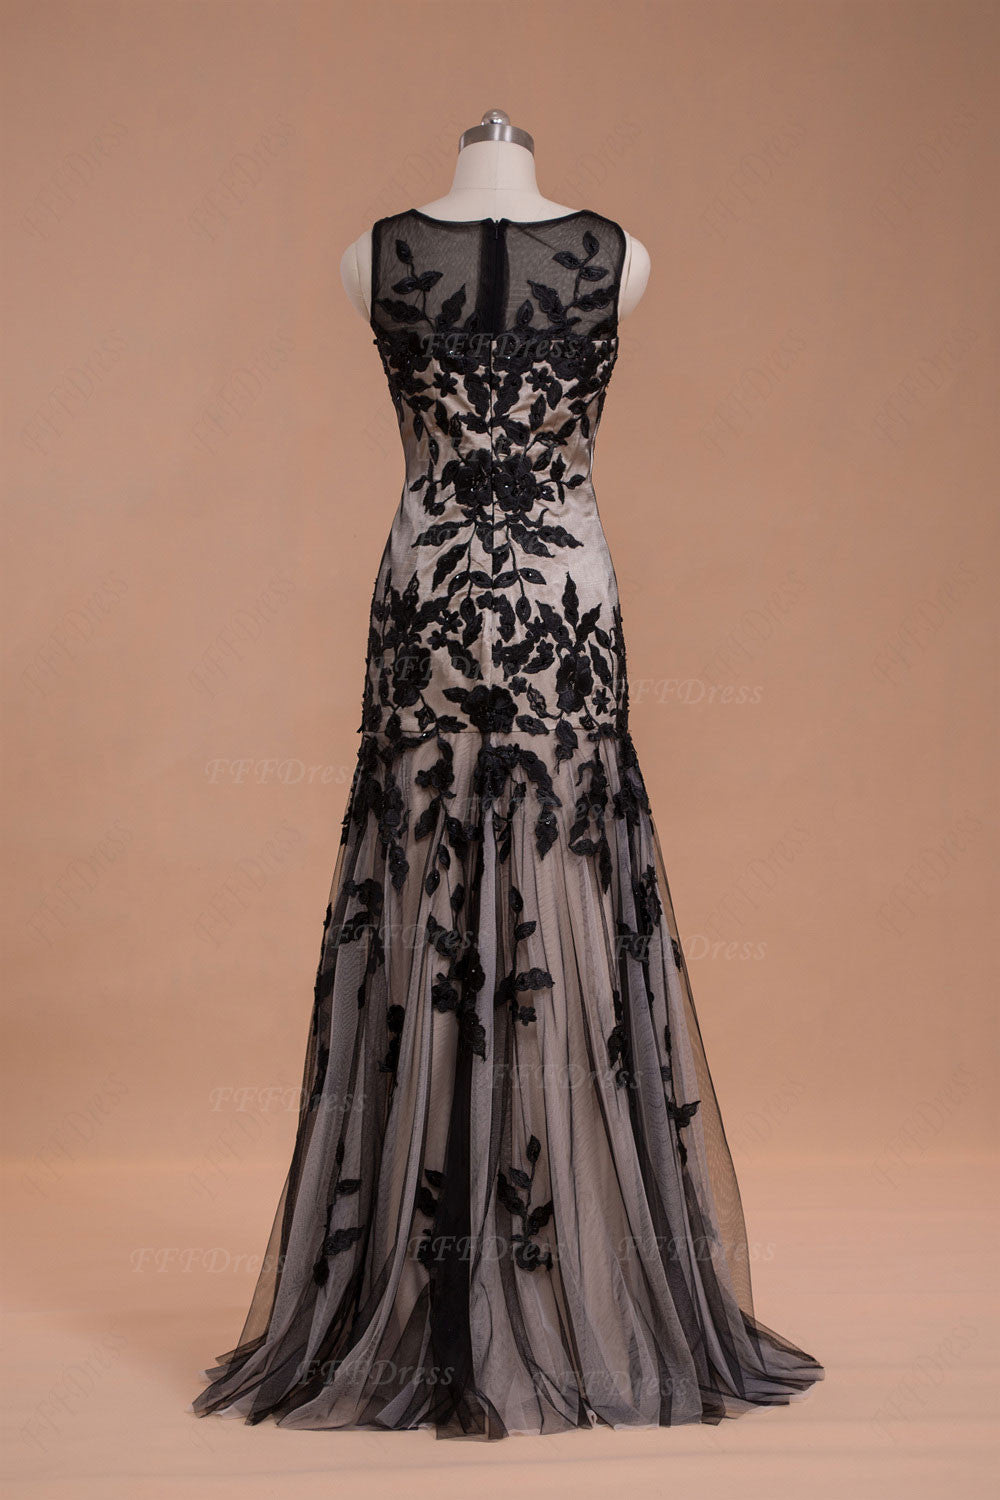 Modest black champagne long prom dress mother of the bride dresses